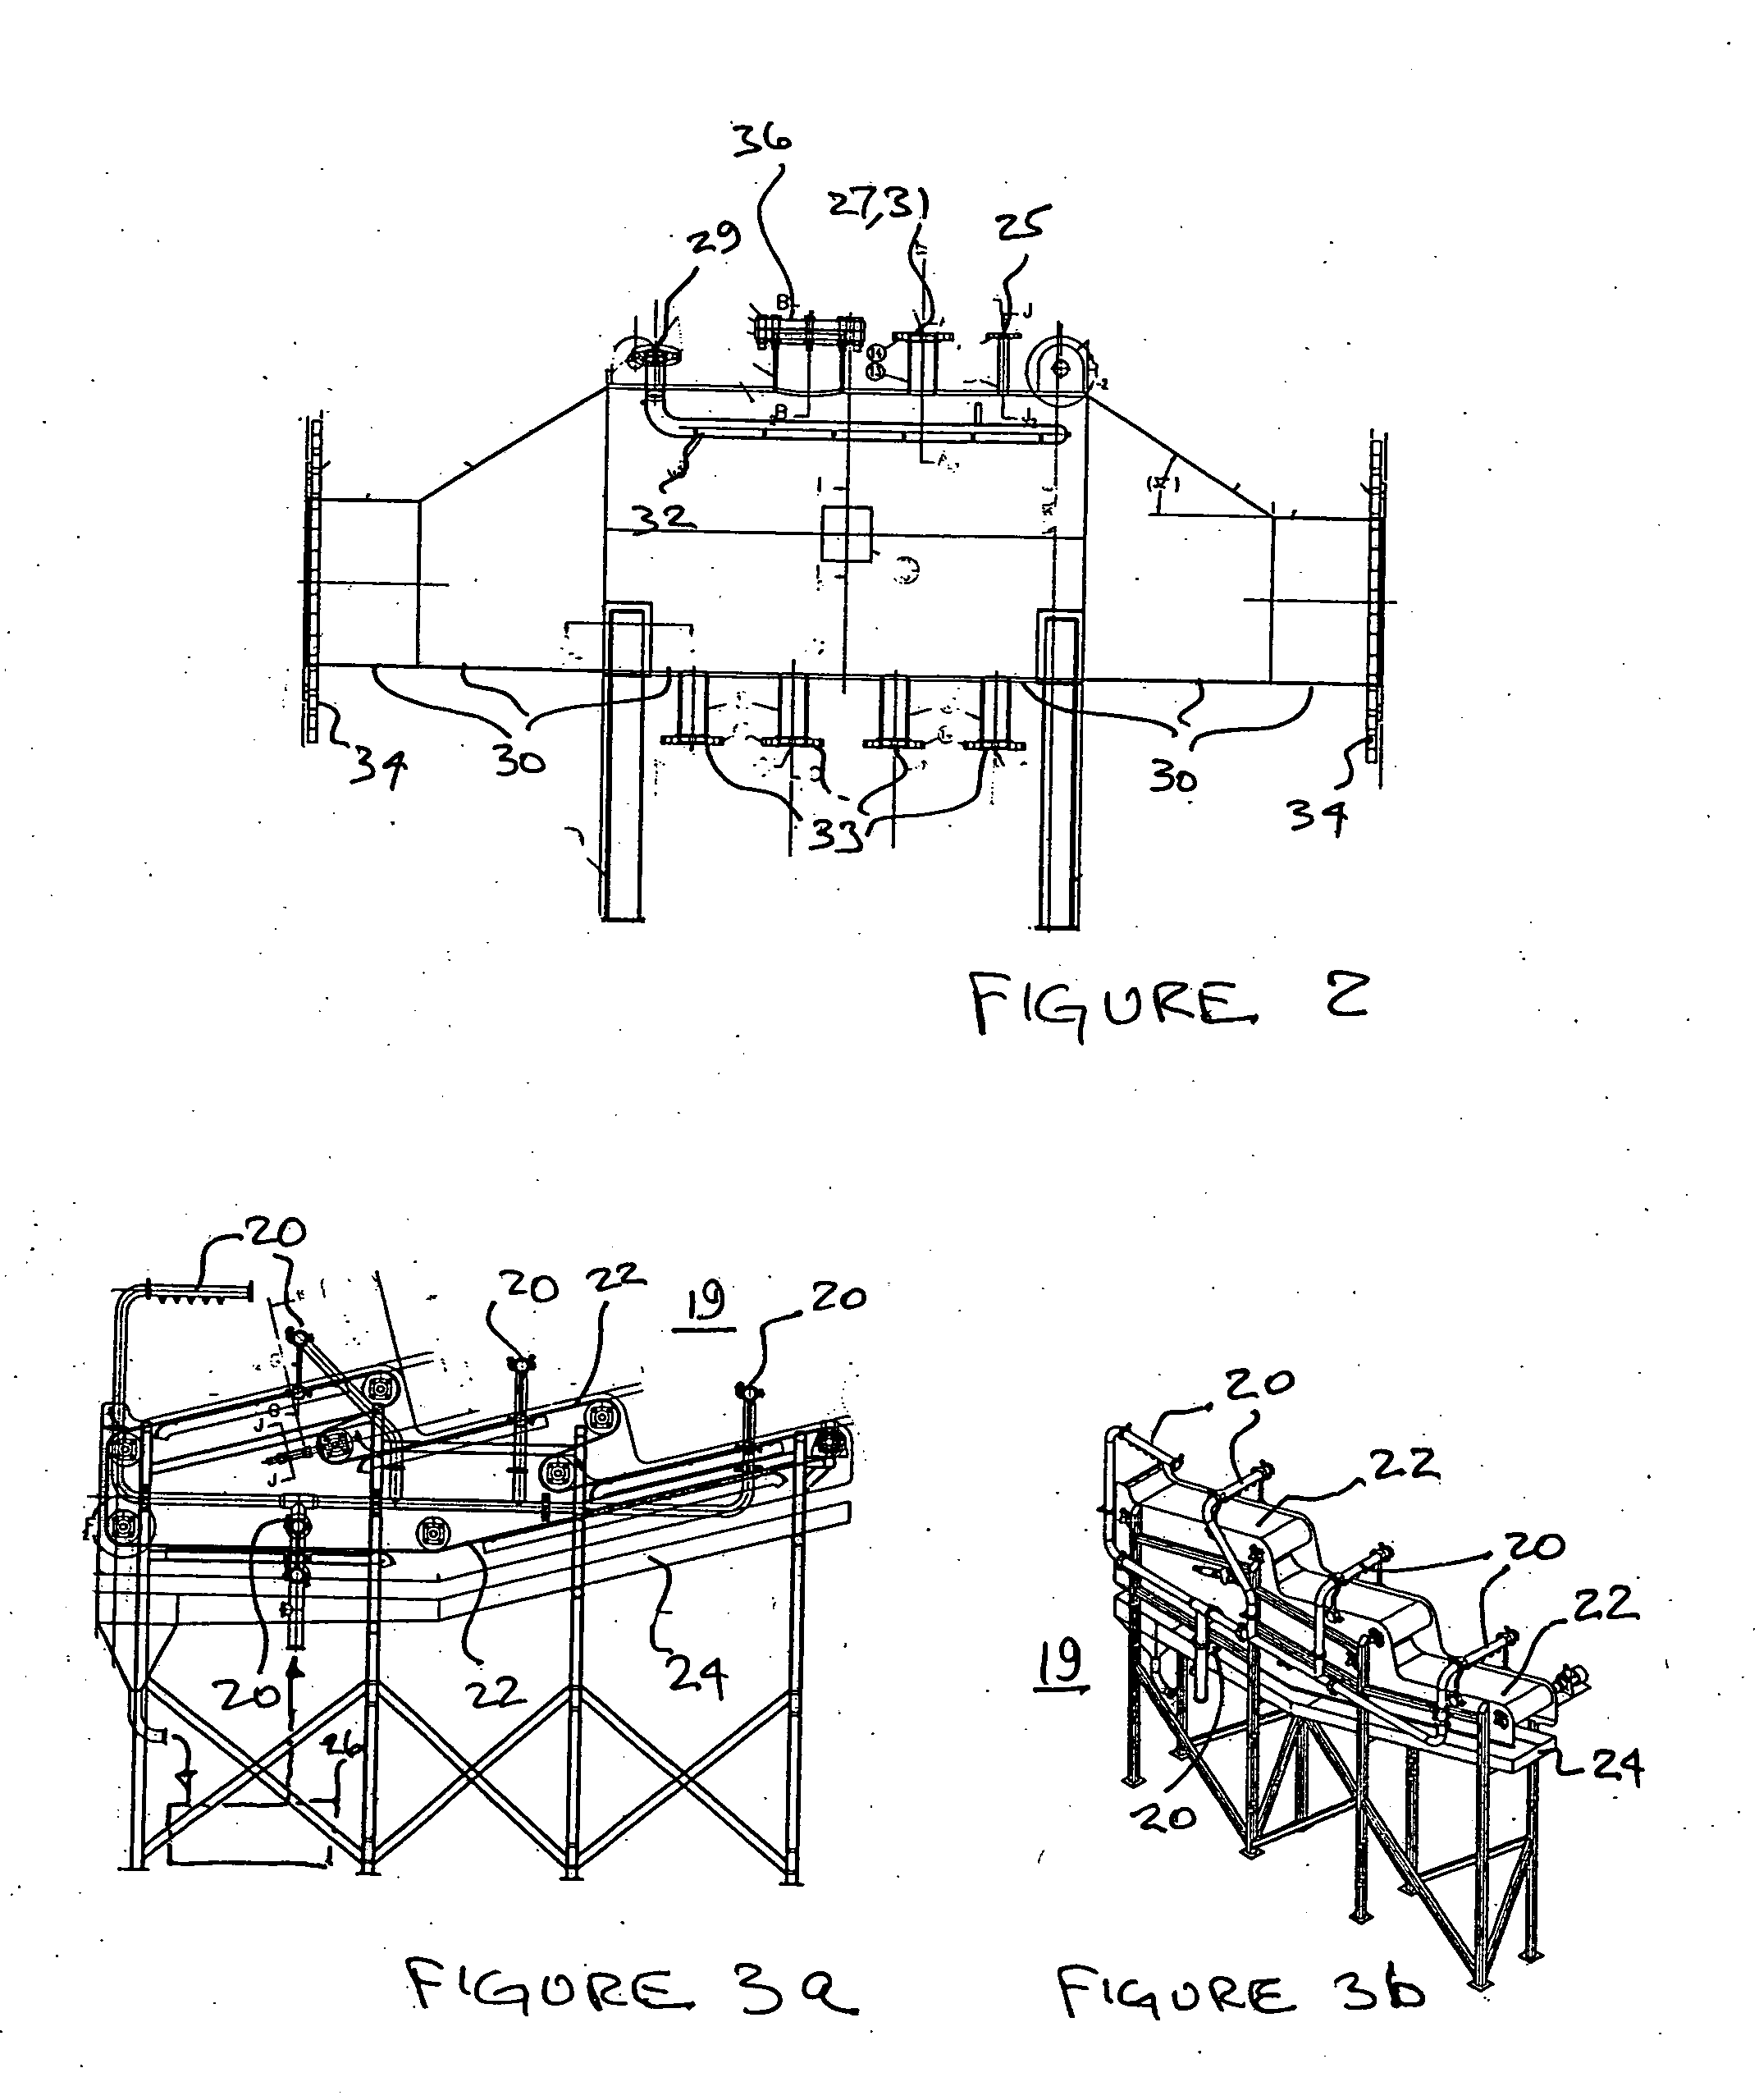 Method and apparatus for processing meat, poultry and fish products